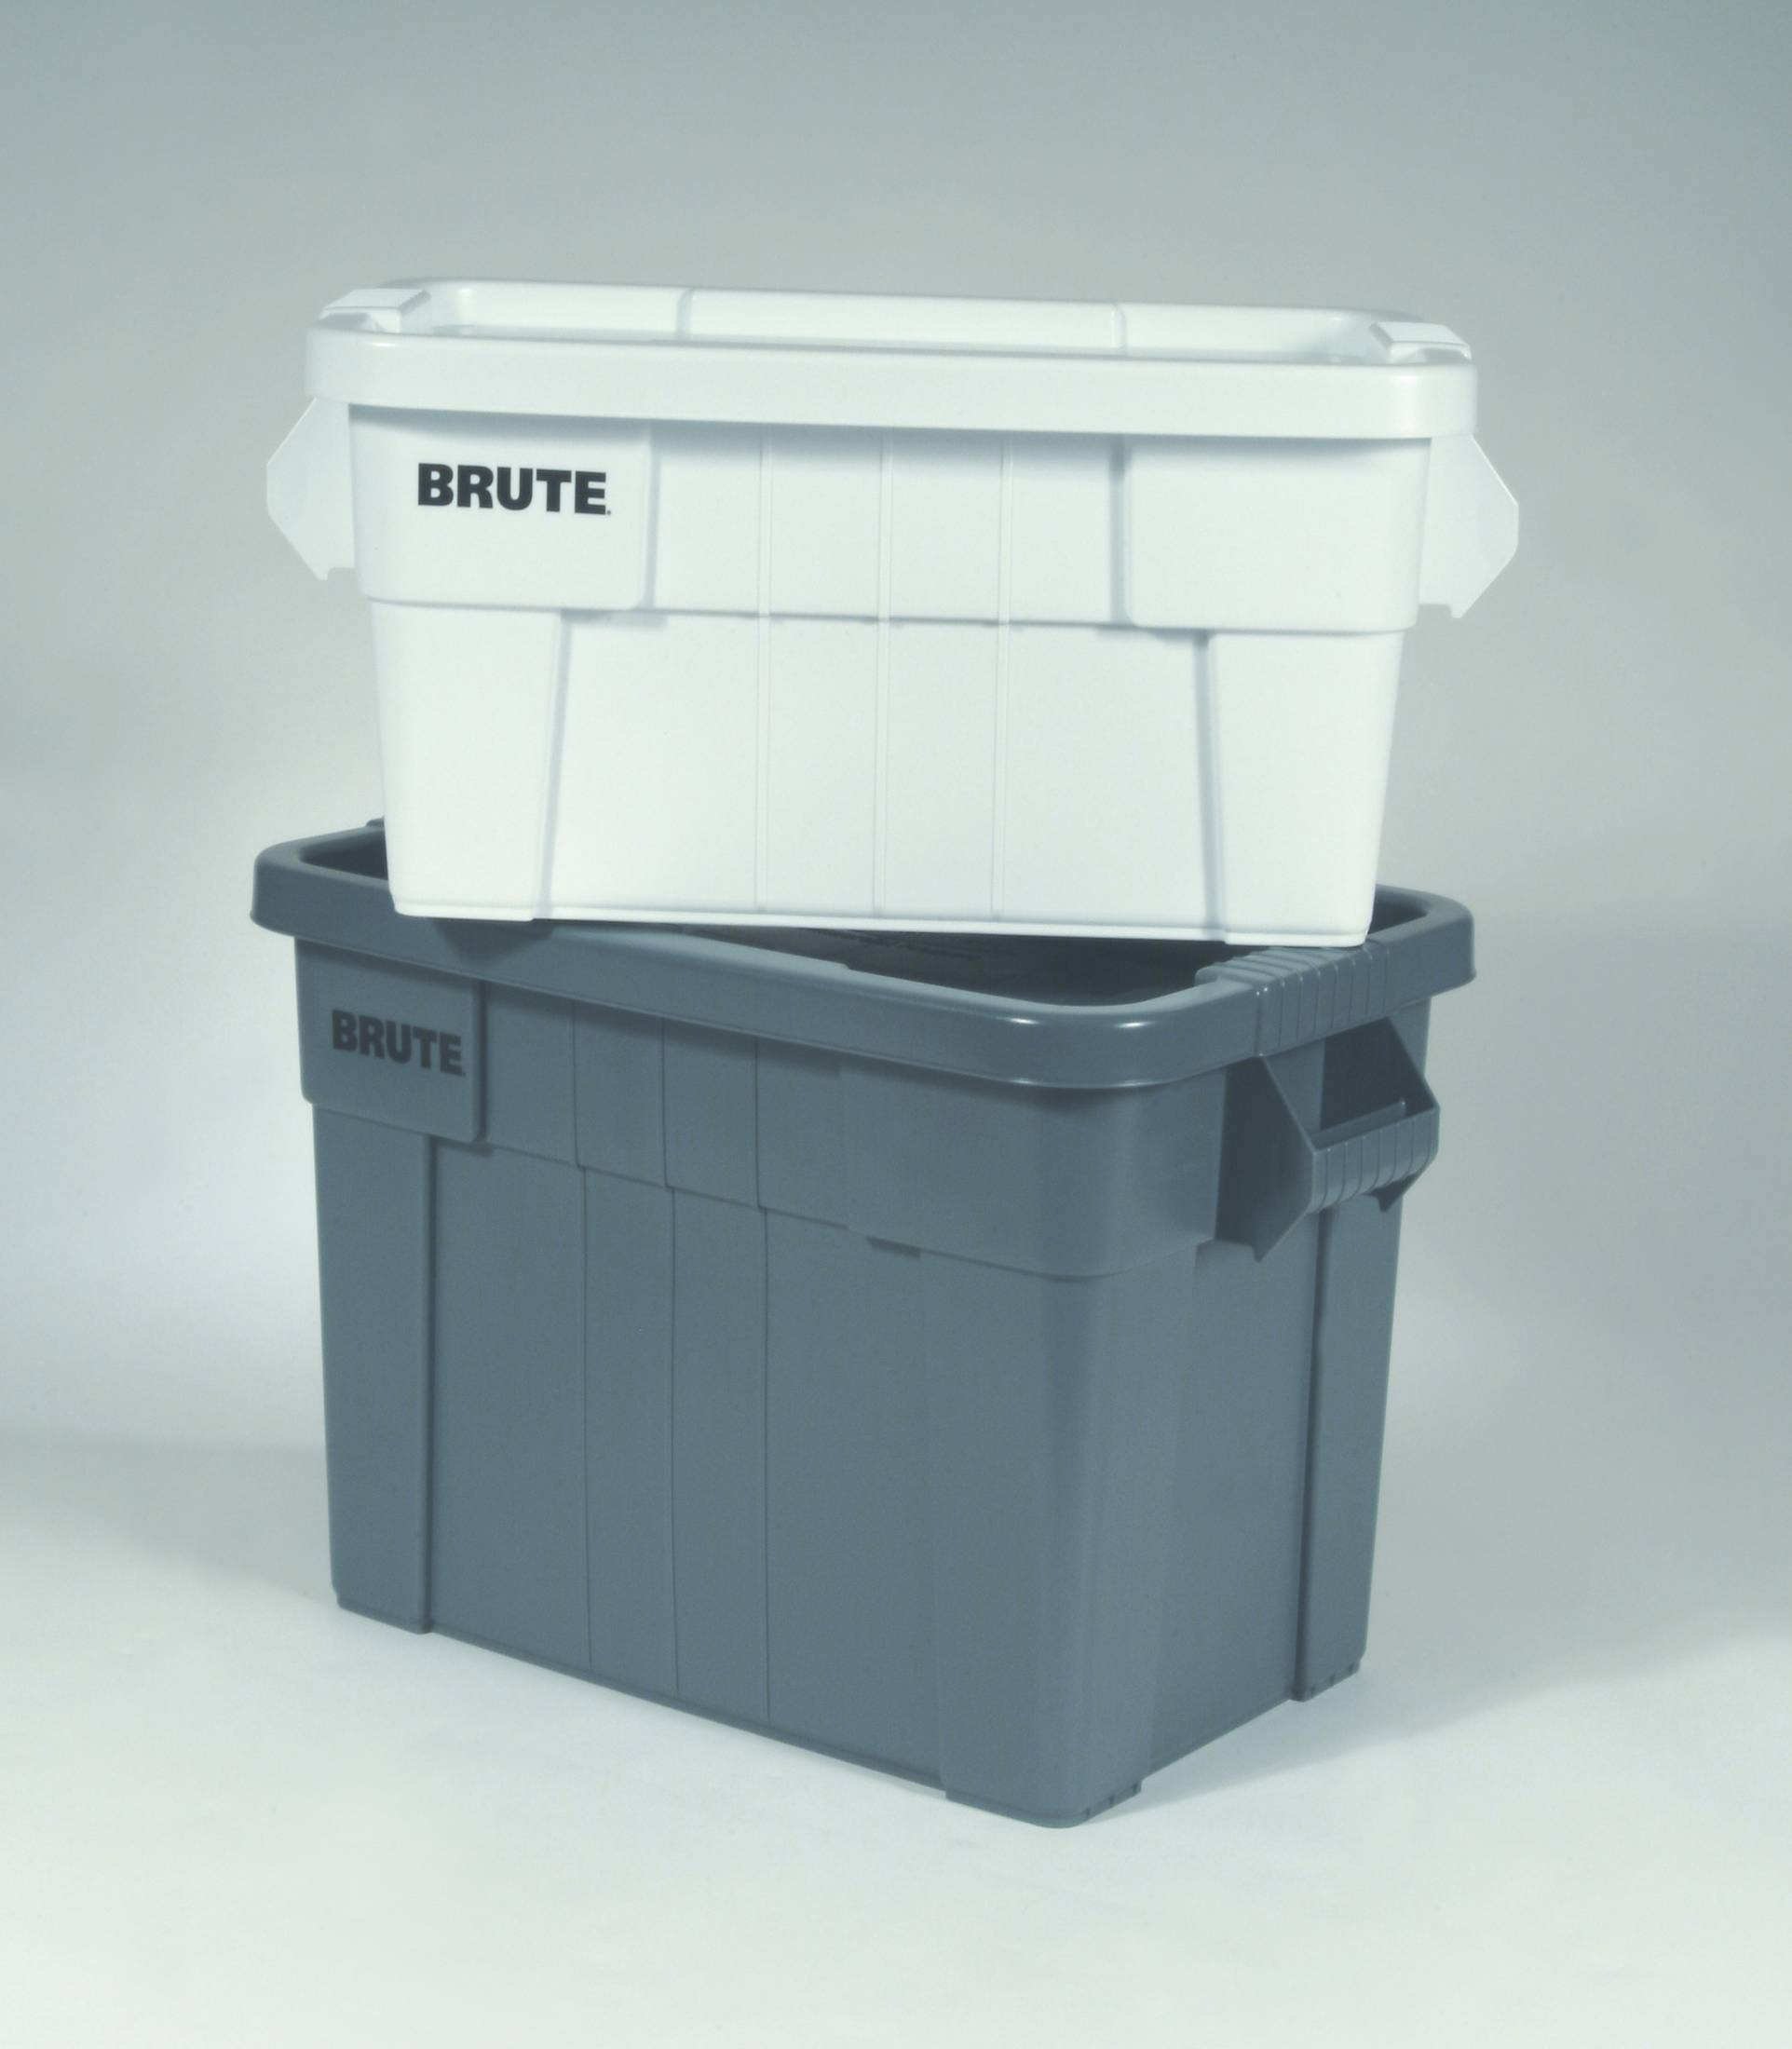 Rubbermaid Commercial Products BRUTE Tote Storage Container with Lid, 20-Ga